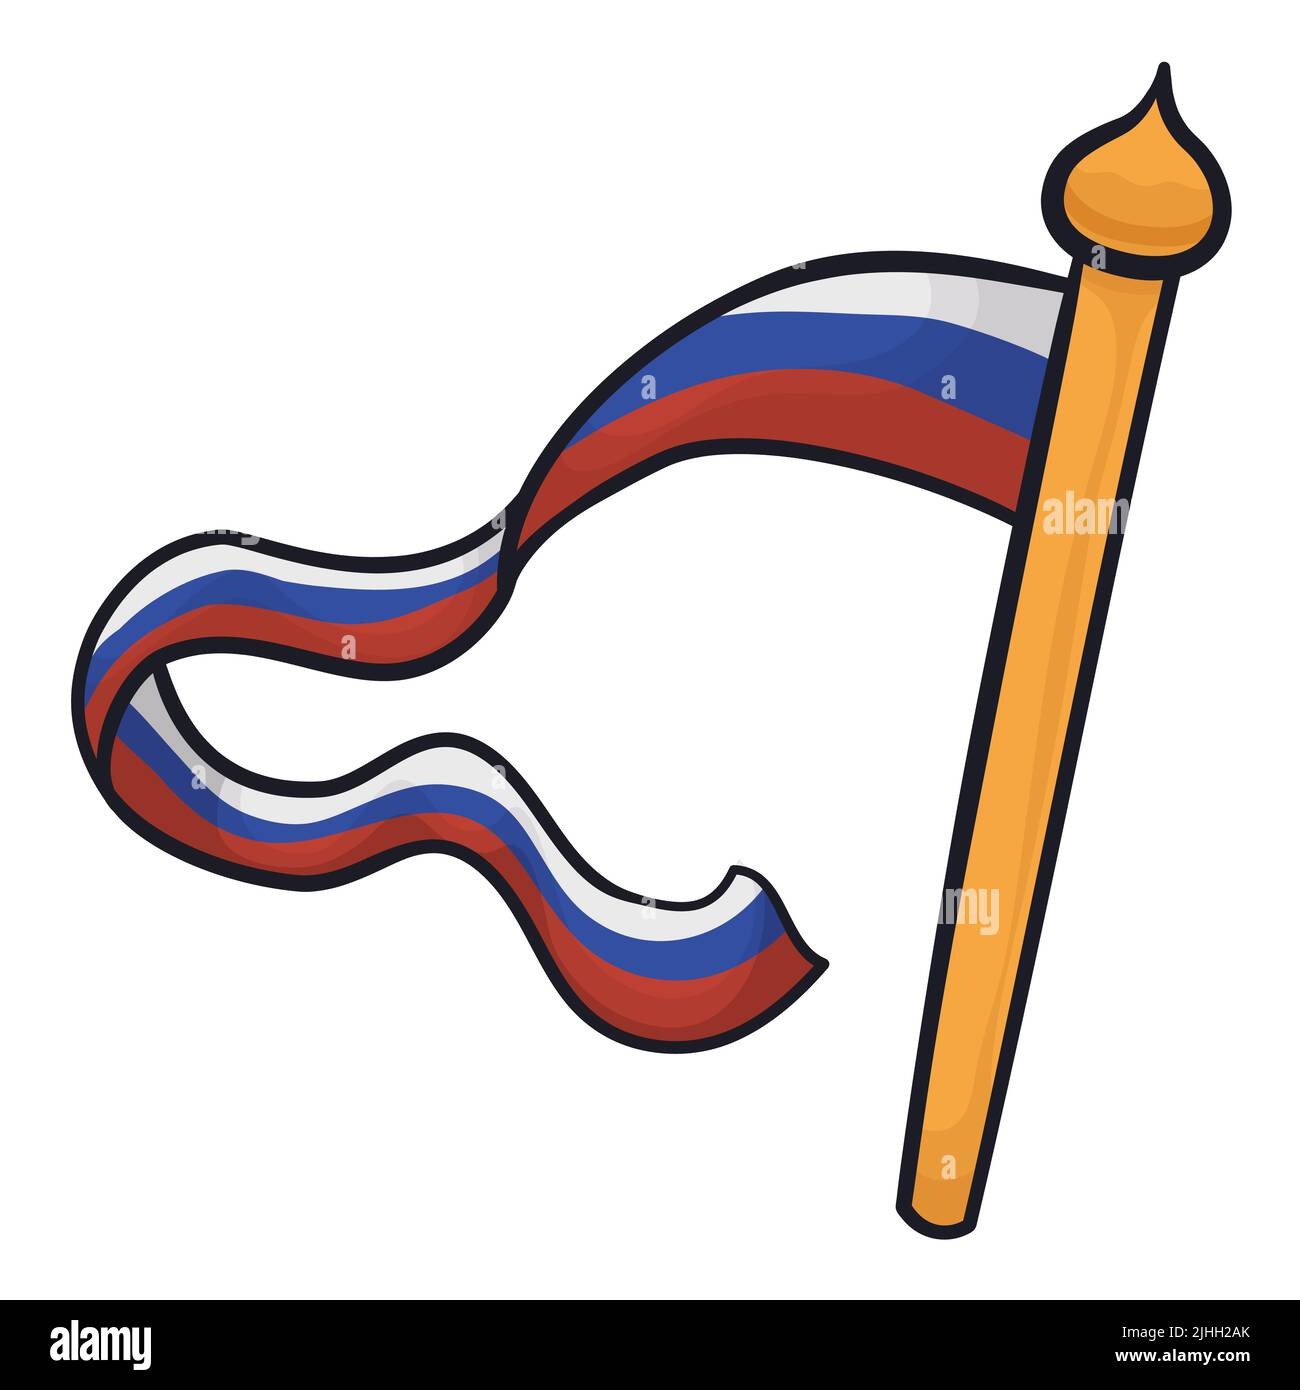 Golden flagpole decorated with onion dome shape and long tricolor ribbon folded like the Russian flag. Stock Vector